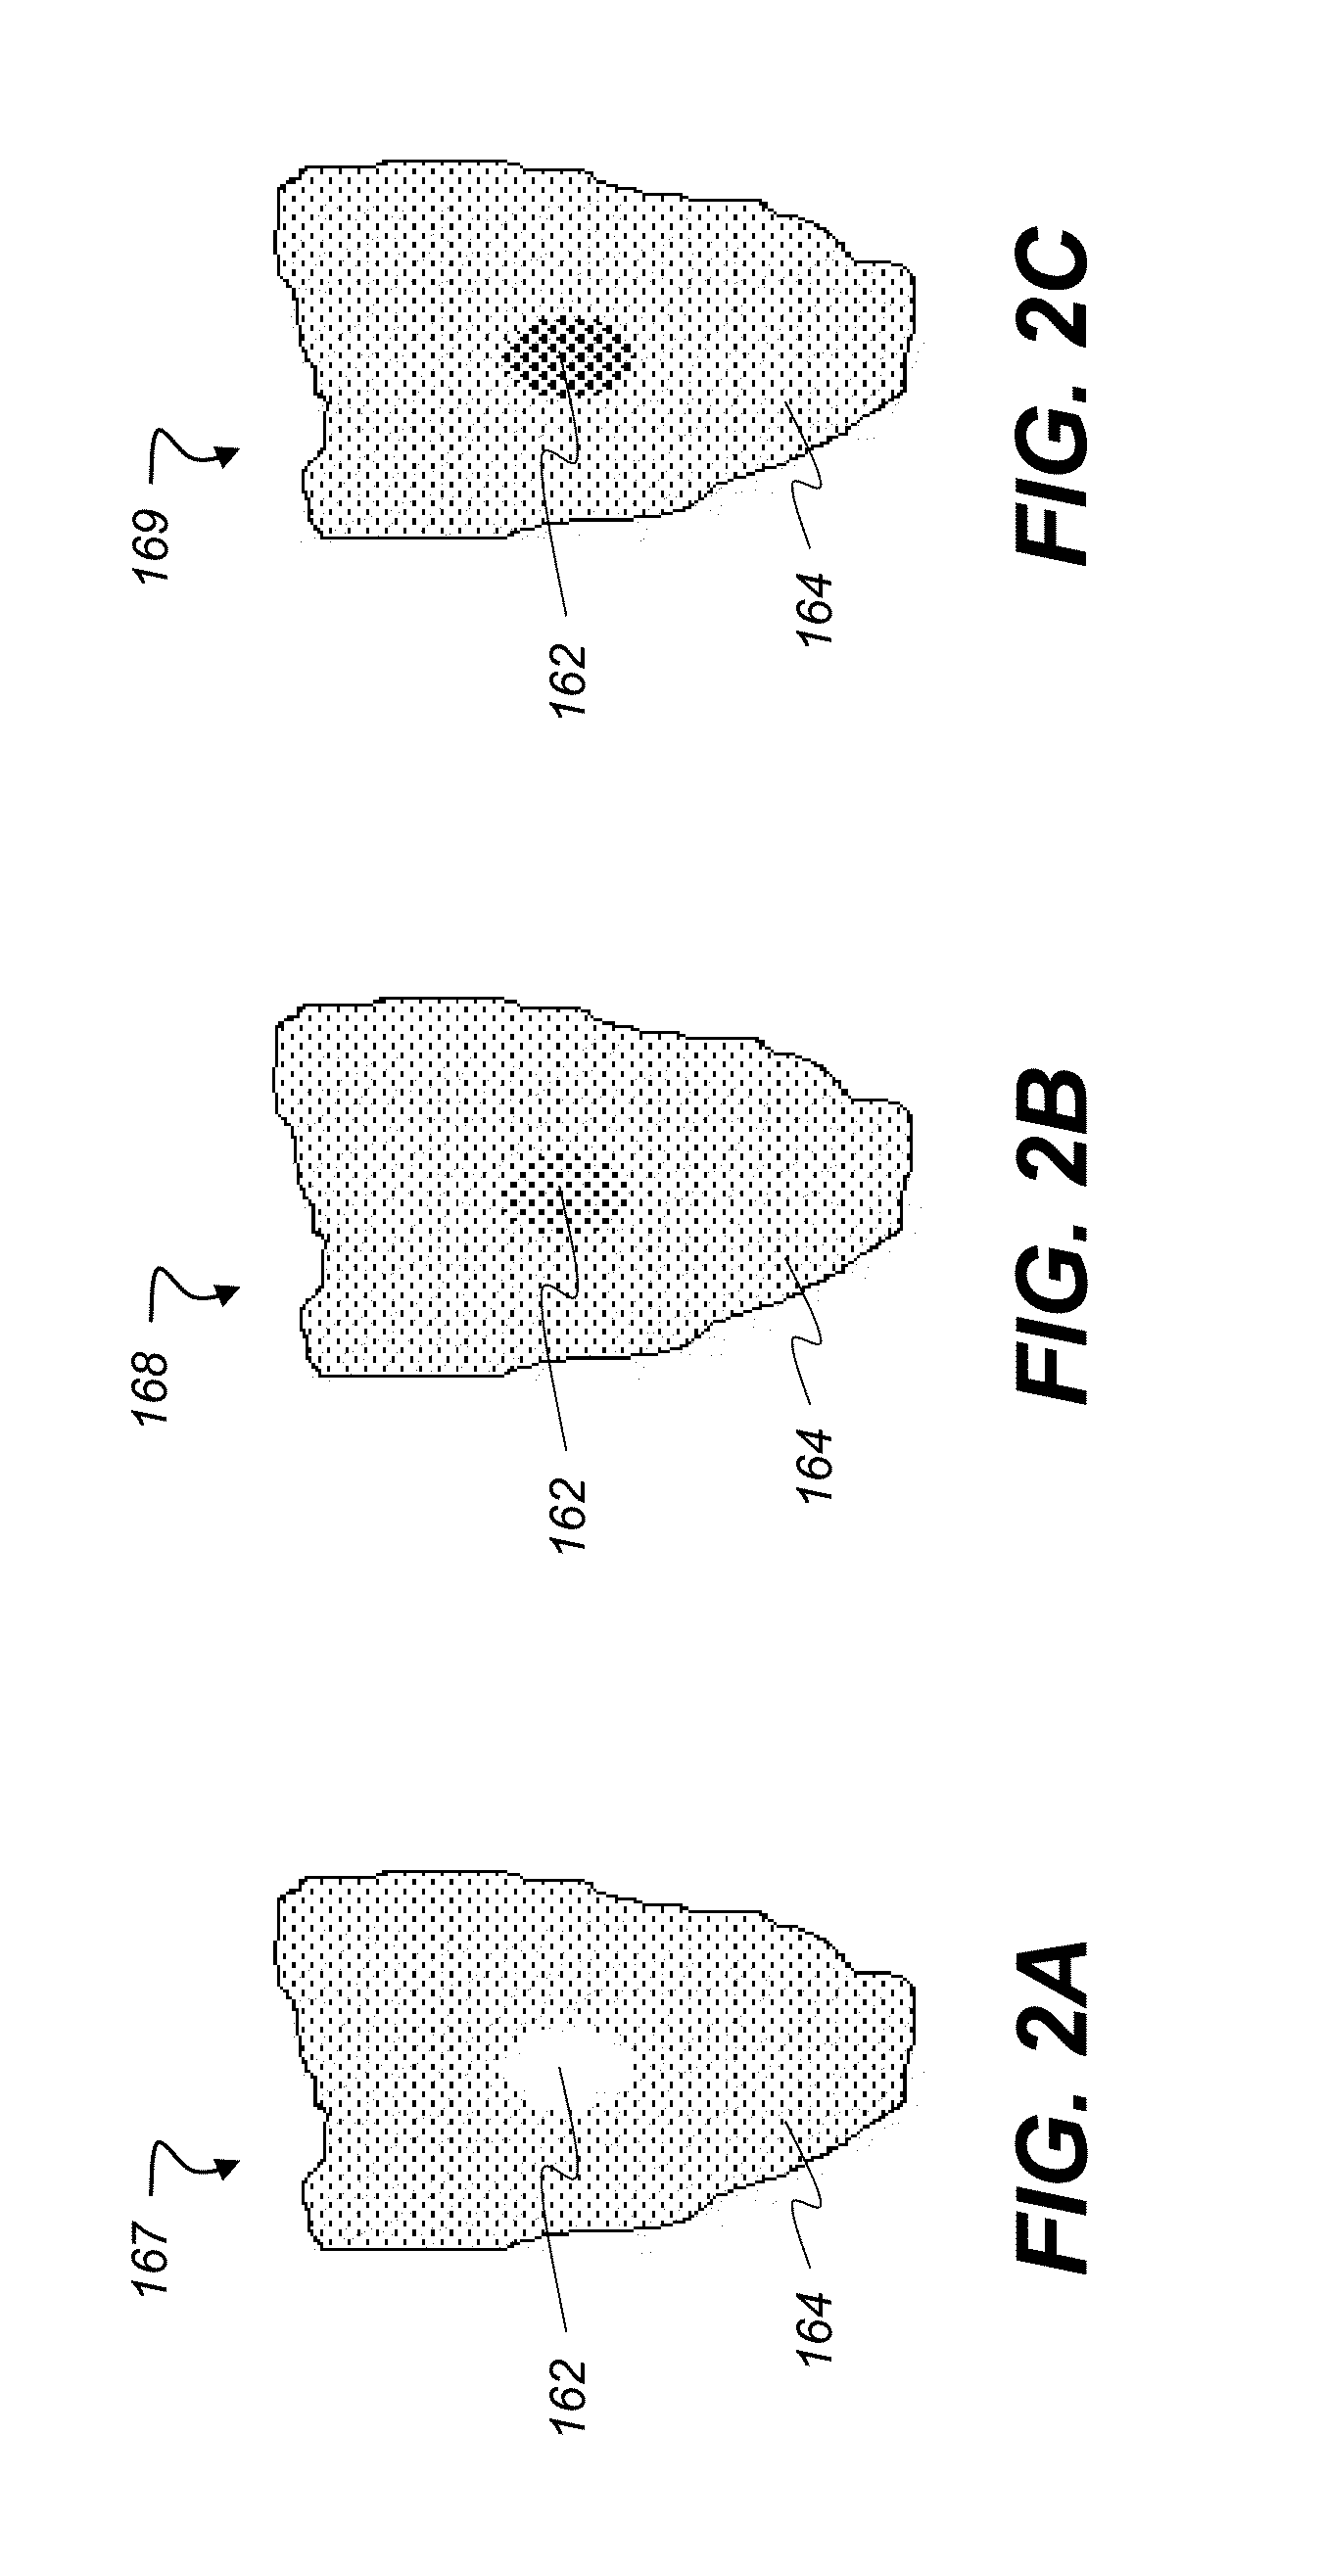 Method for identifying a tooth region